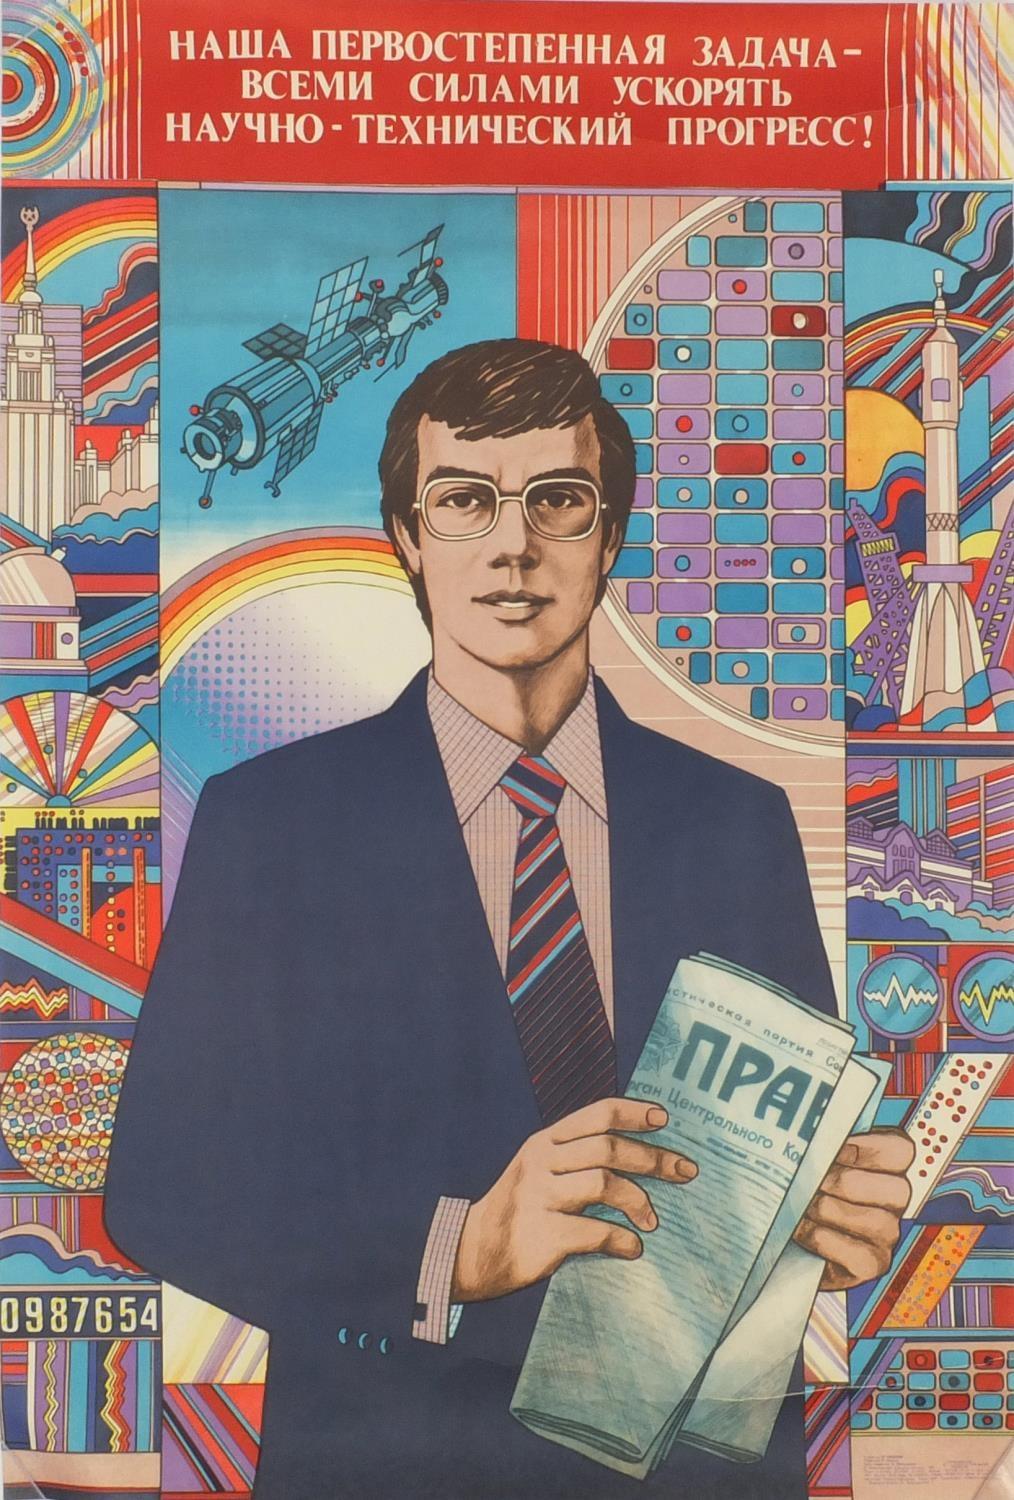 Collection of Russian propaganda posters predominantly 1980's examples, the largest 103cm x 78cm - Image 18 of 34